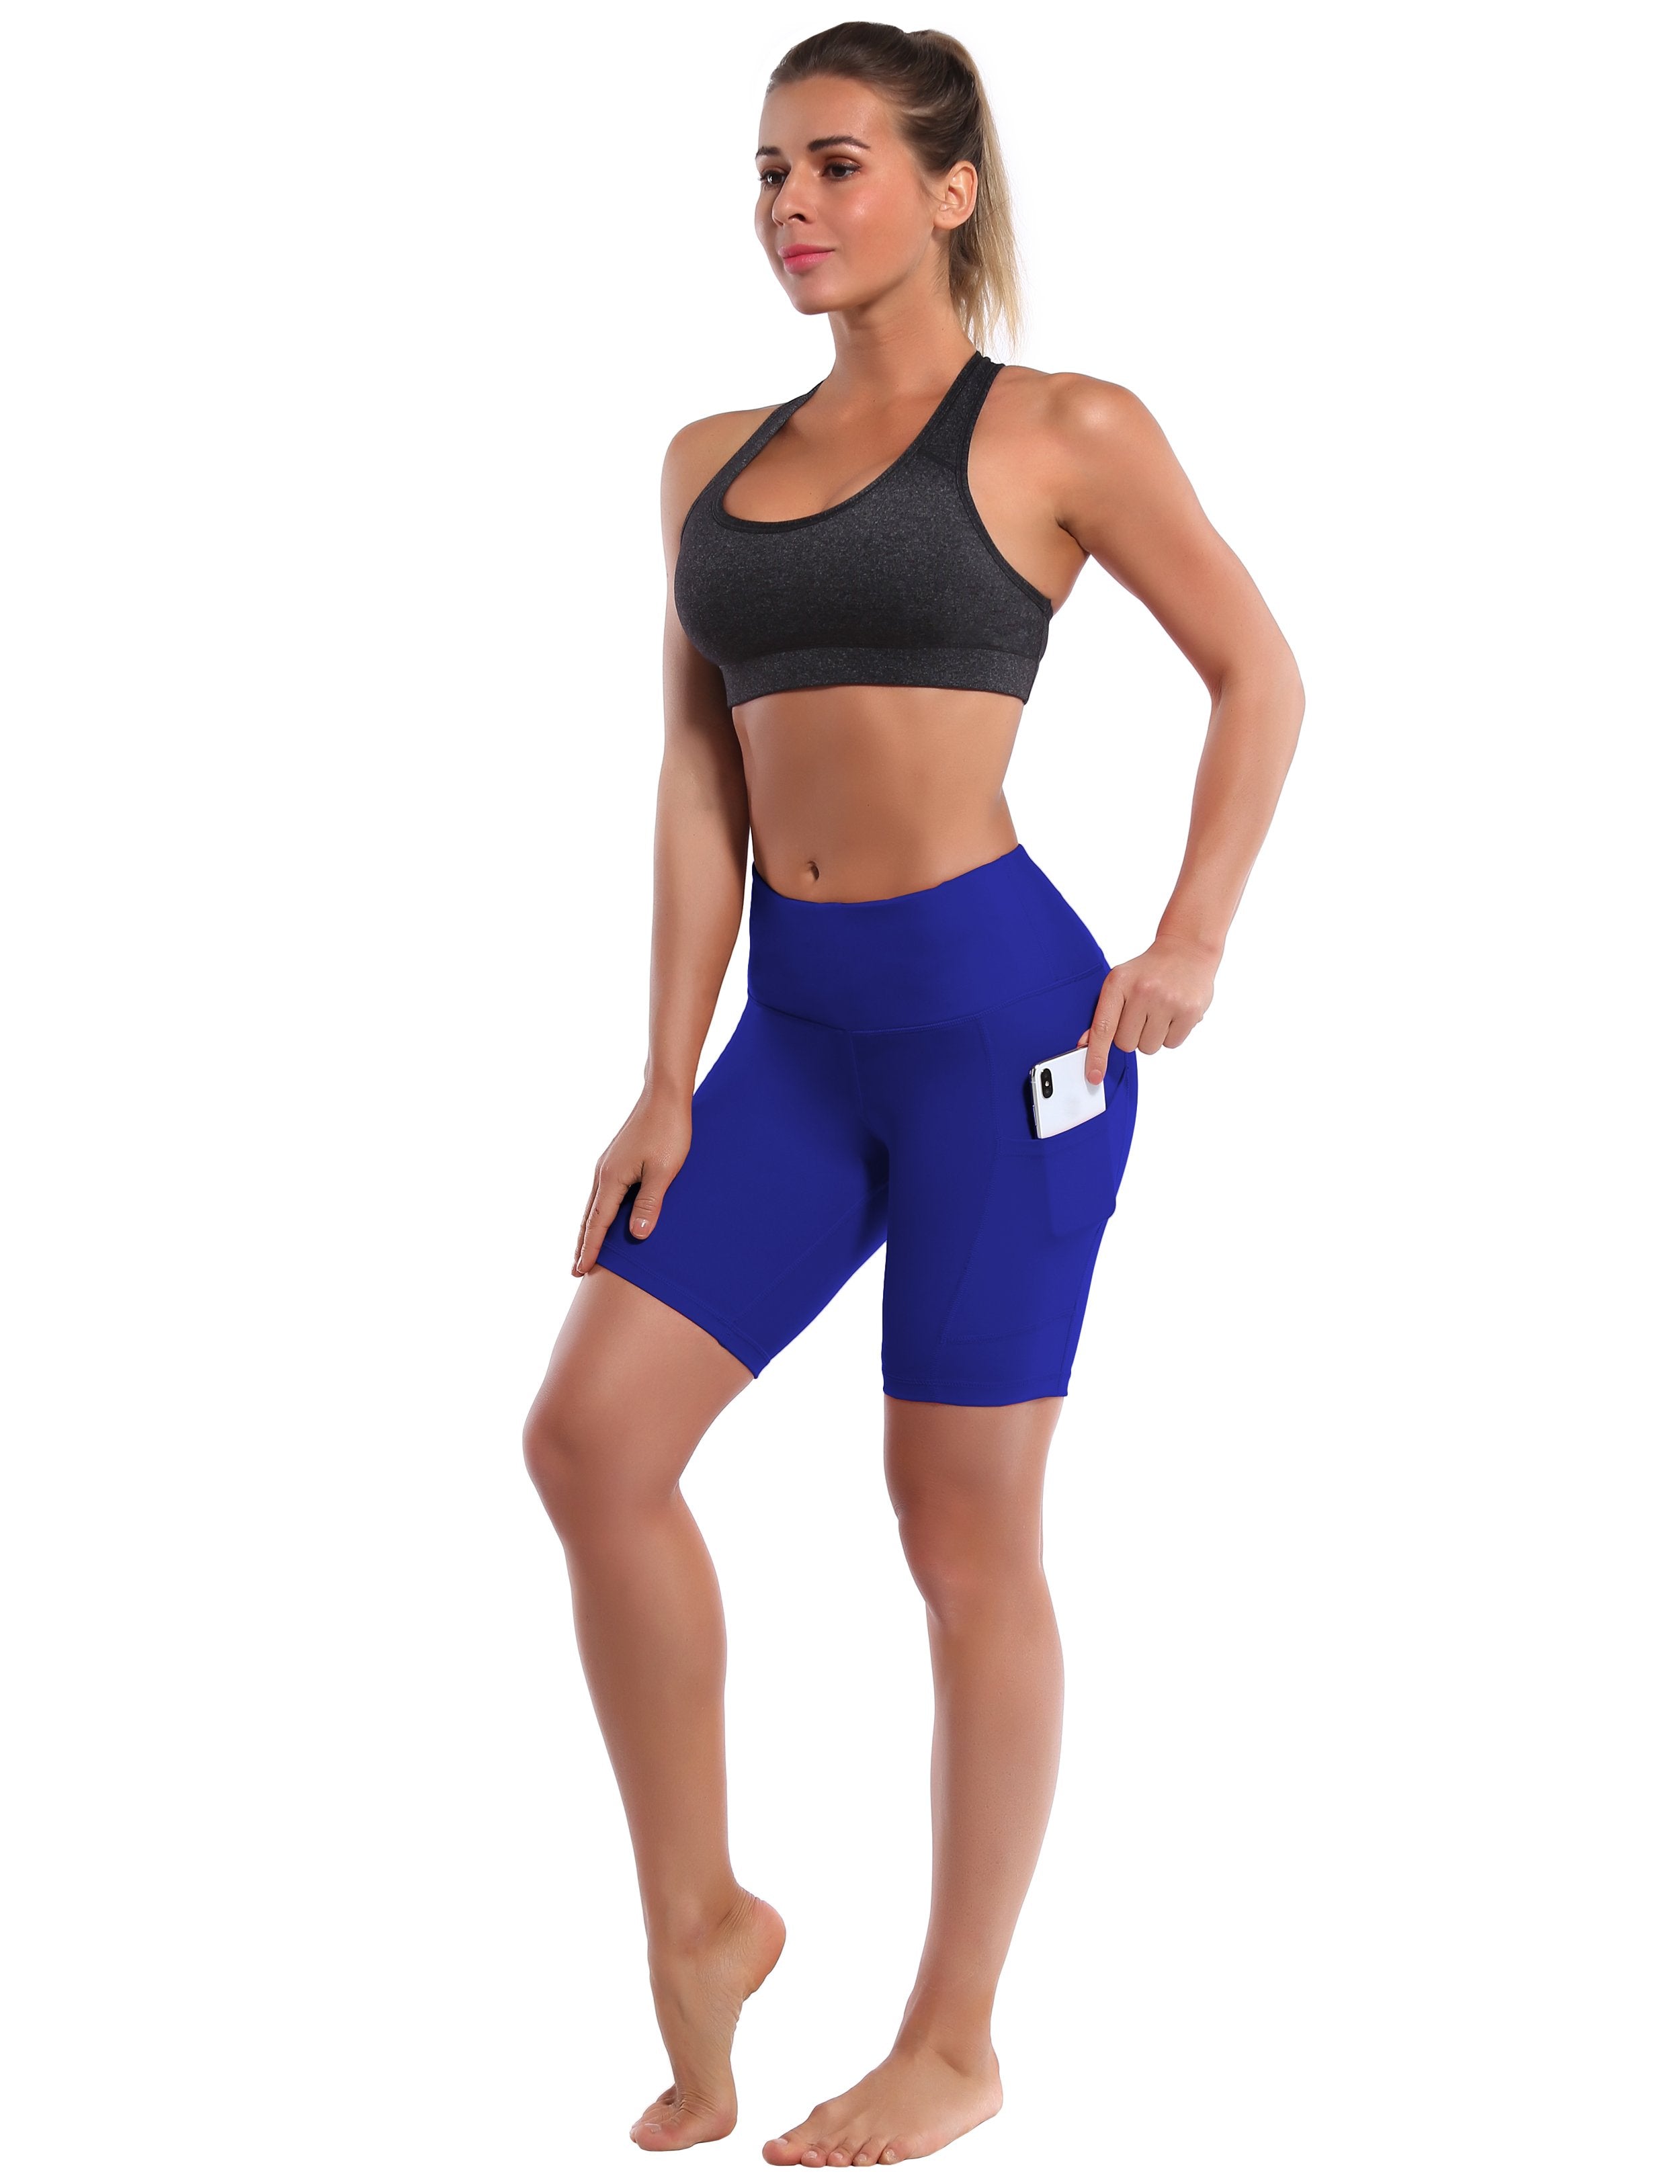 8" Side Pockets Yoga Shorts navy Sleek, soft, smooth and totally comfortable: our newest style is here. Softest-ever fabric High elasticity High density 4-way stretch Fabric doesn't attract lint easily No see-through Moisture-wicking Machine wash 75% Nylon, 25% Spandex